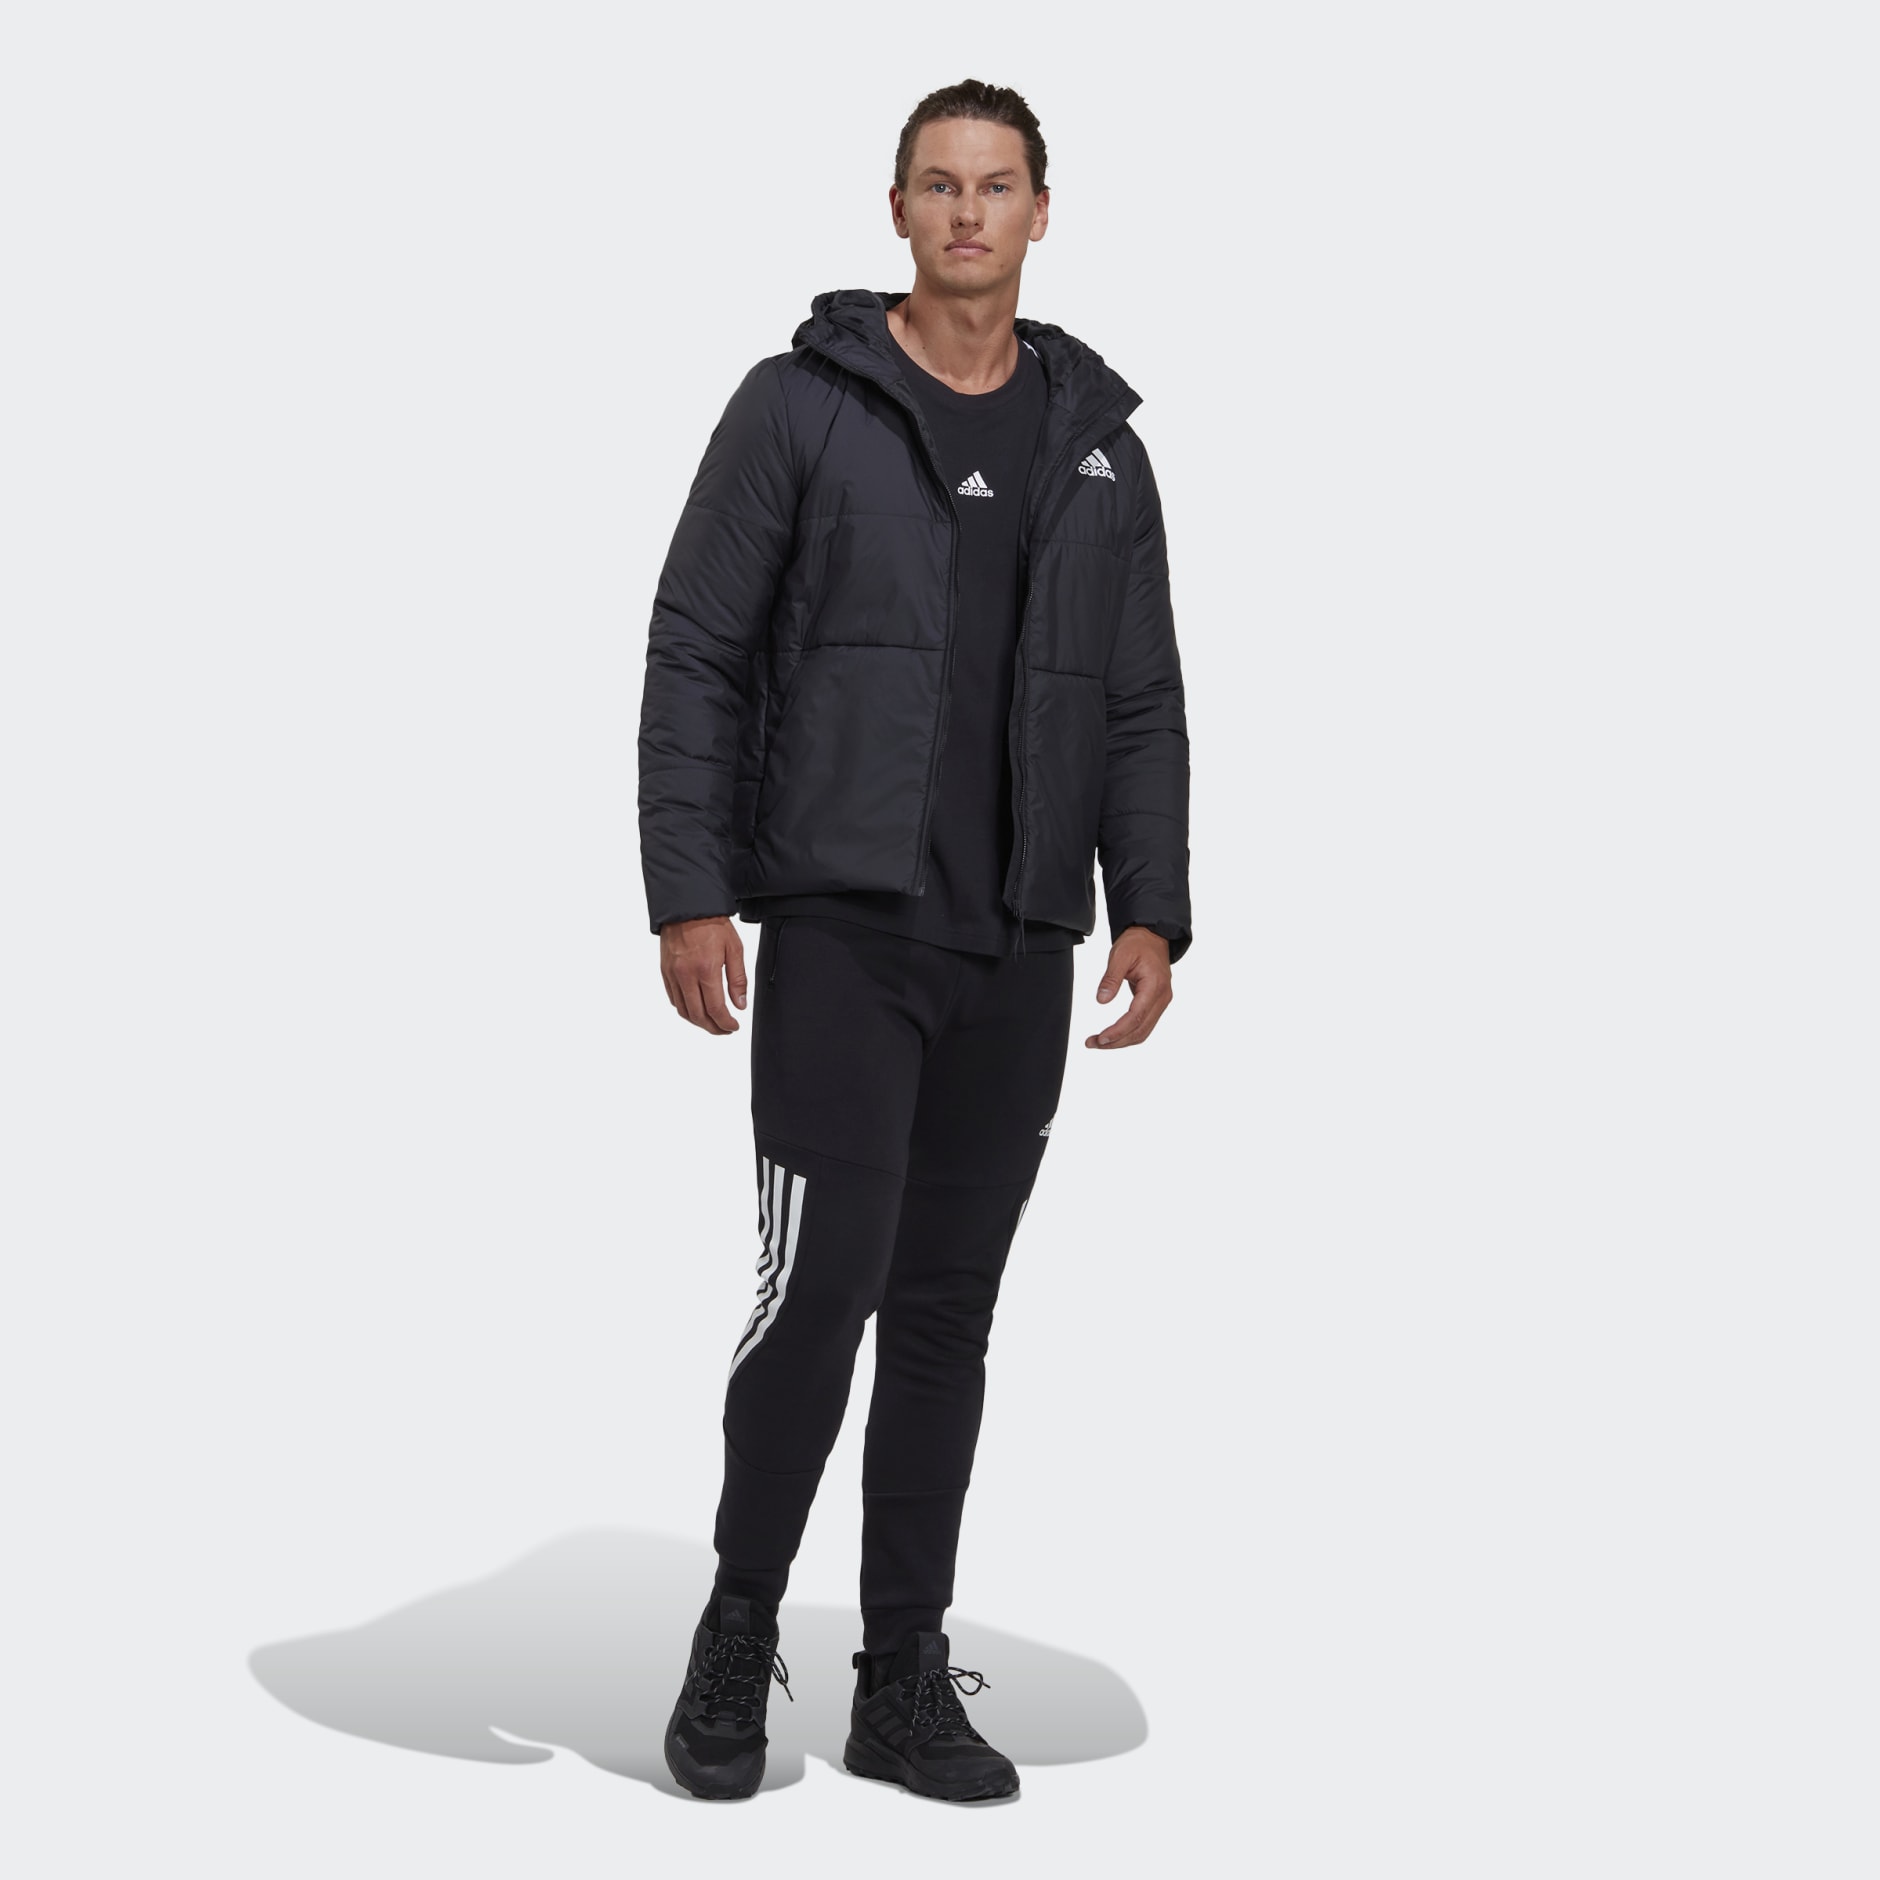 Clothing - BSC 3-Stripes Hooded Insulated Jacket - Black | adidas South ...